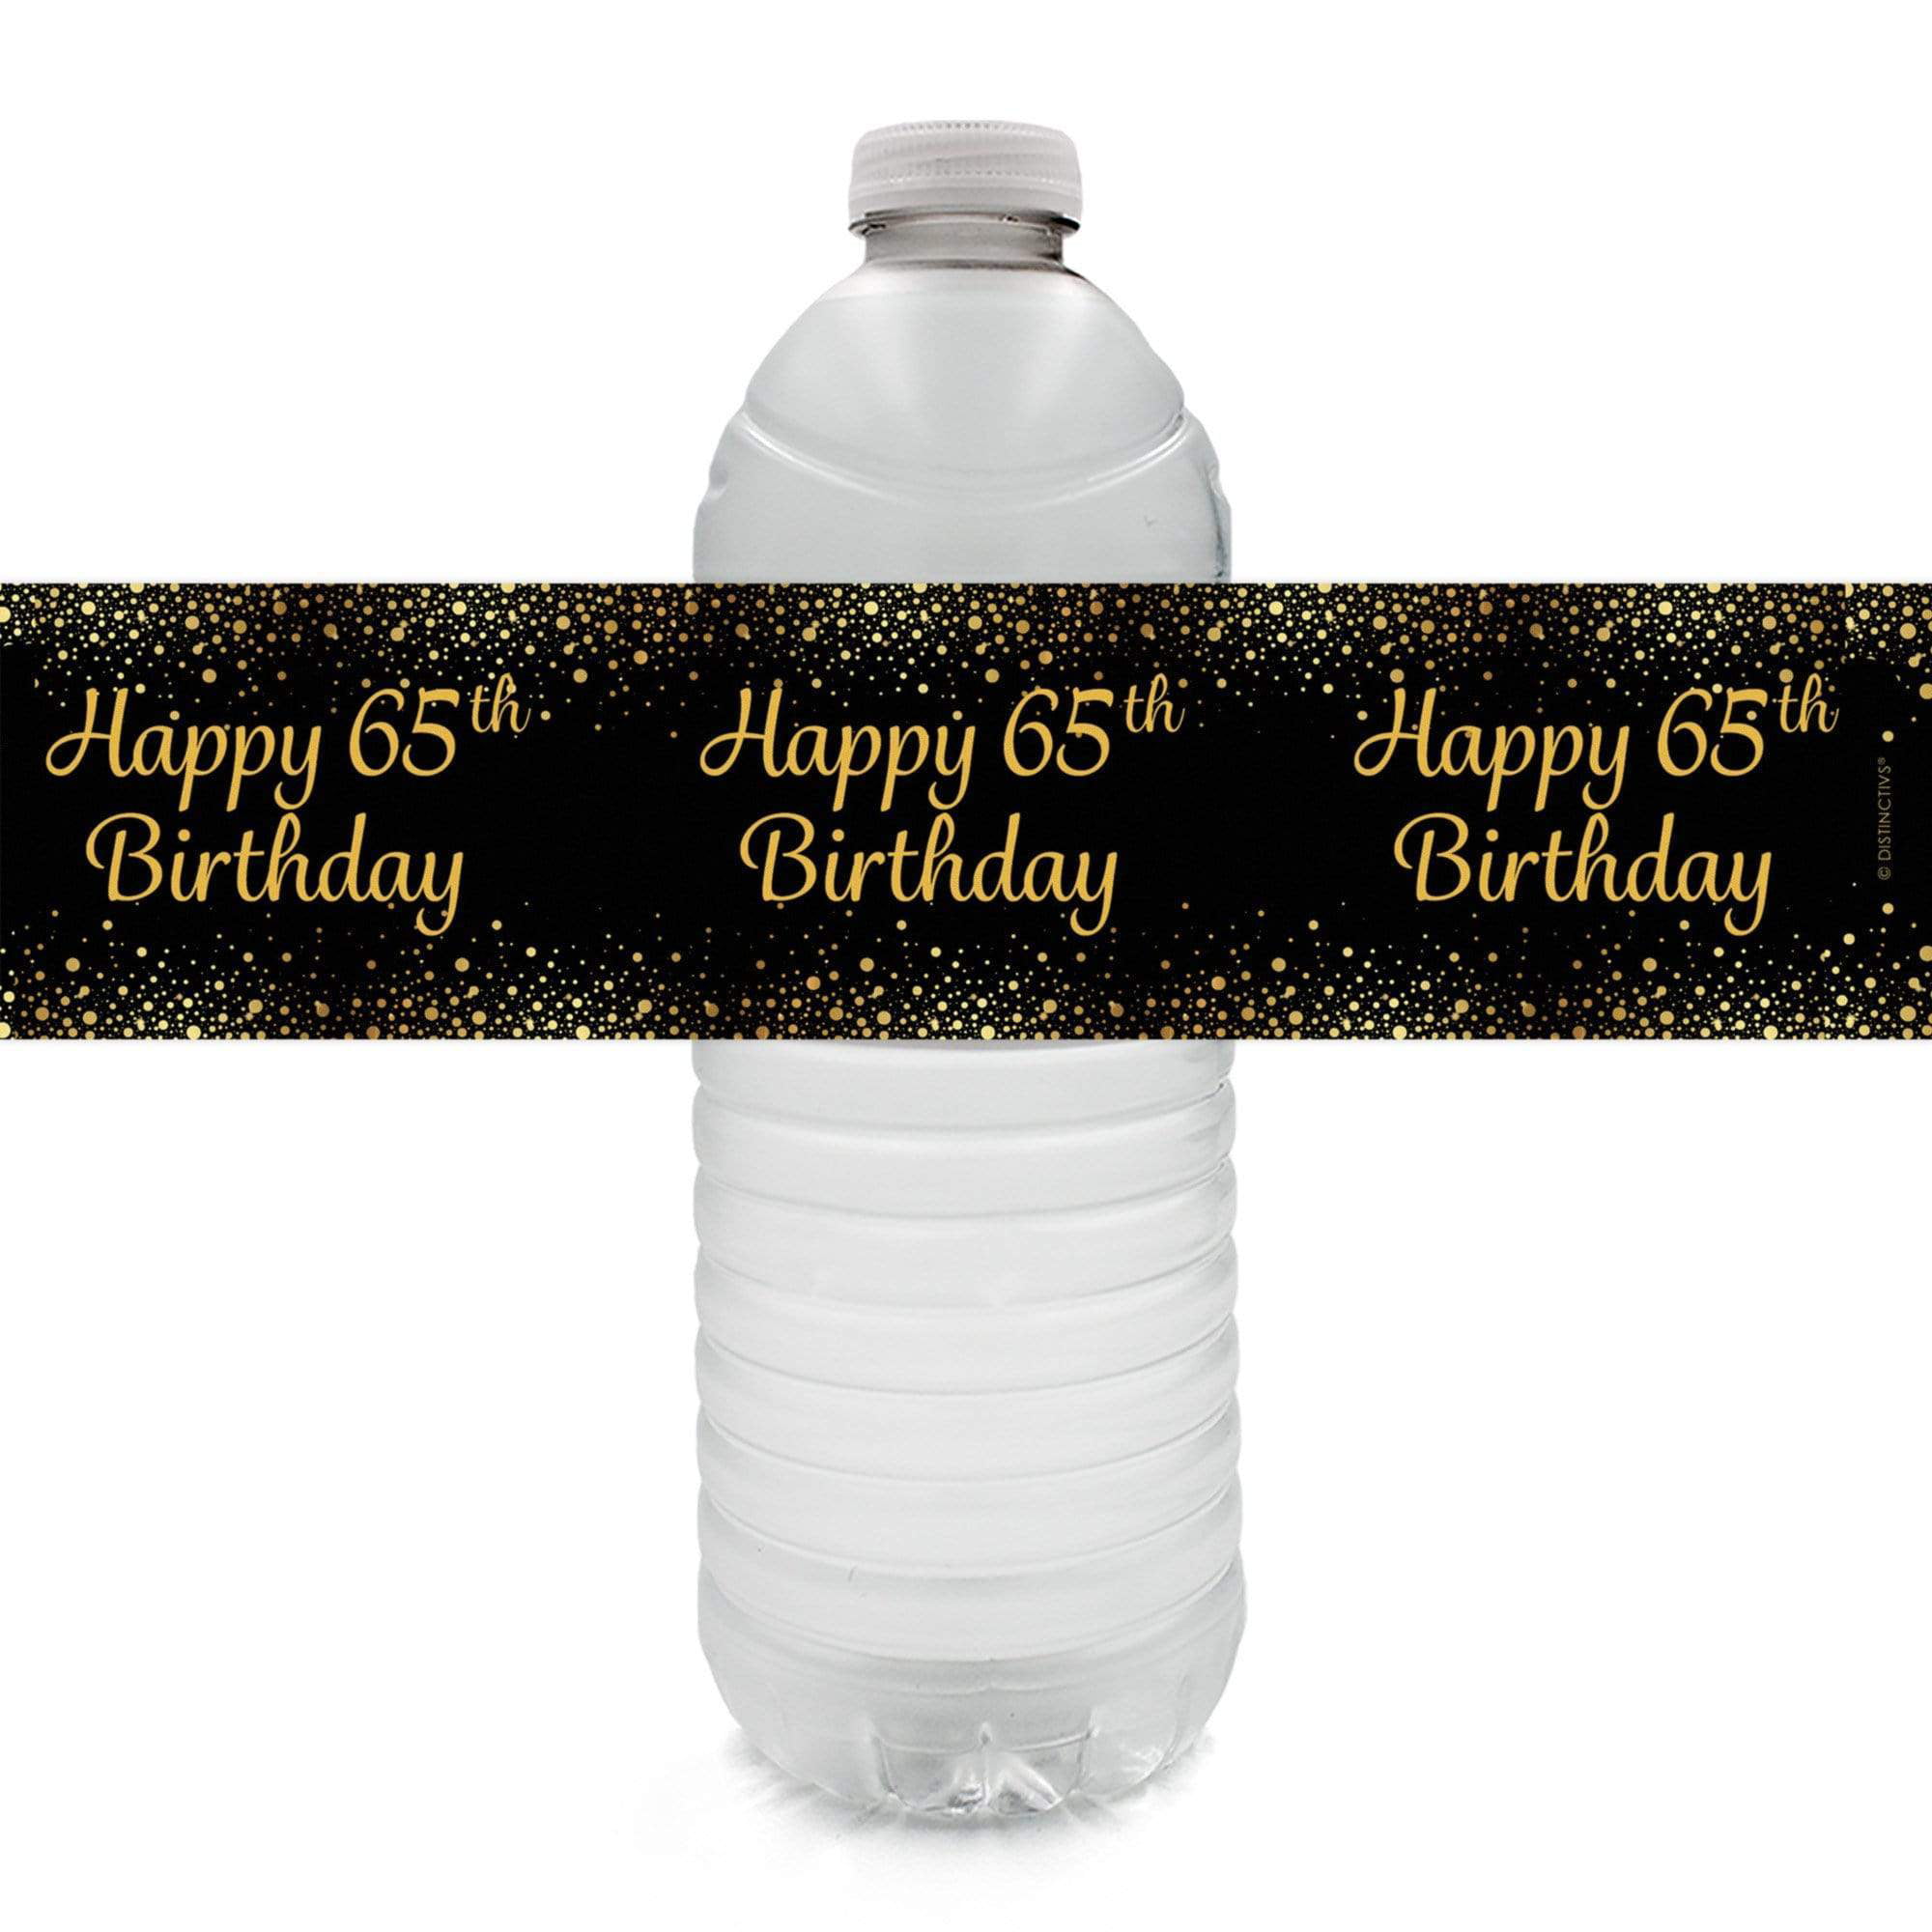 Modern Black with gold writing wedding anniversary Water Bottle Labels 